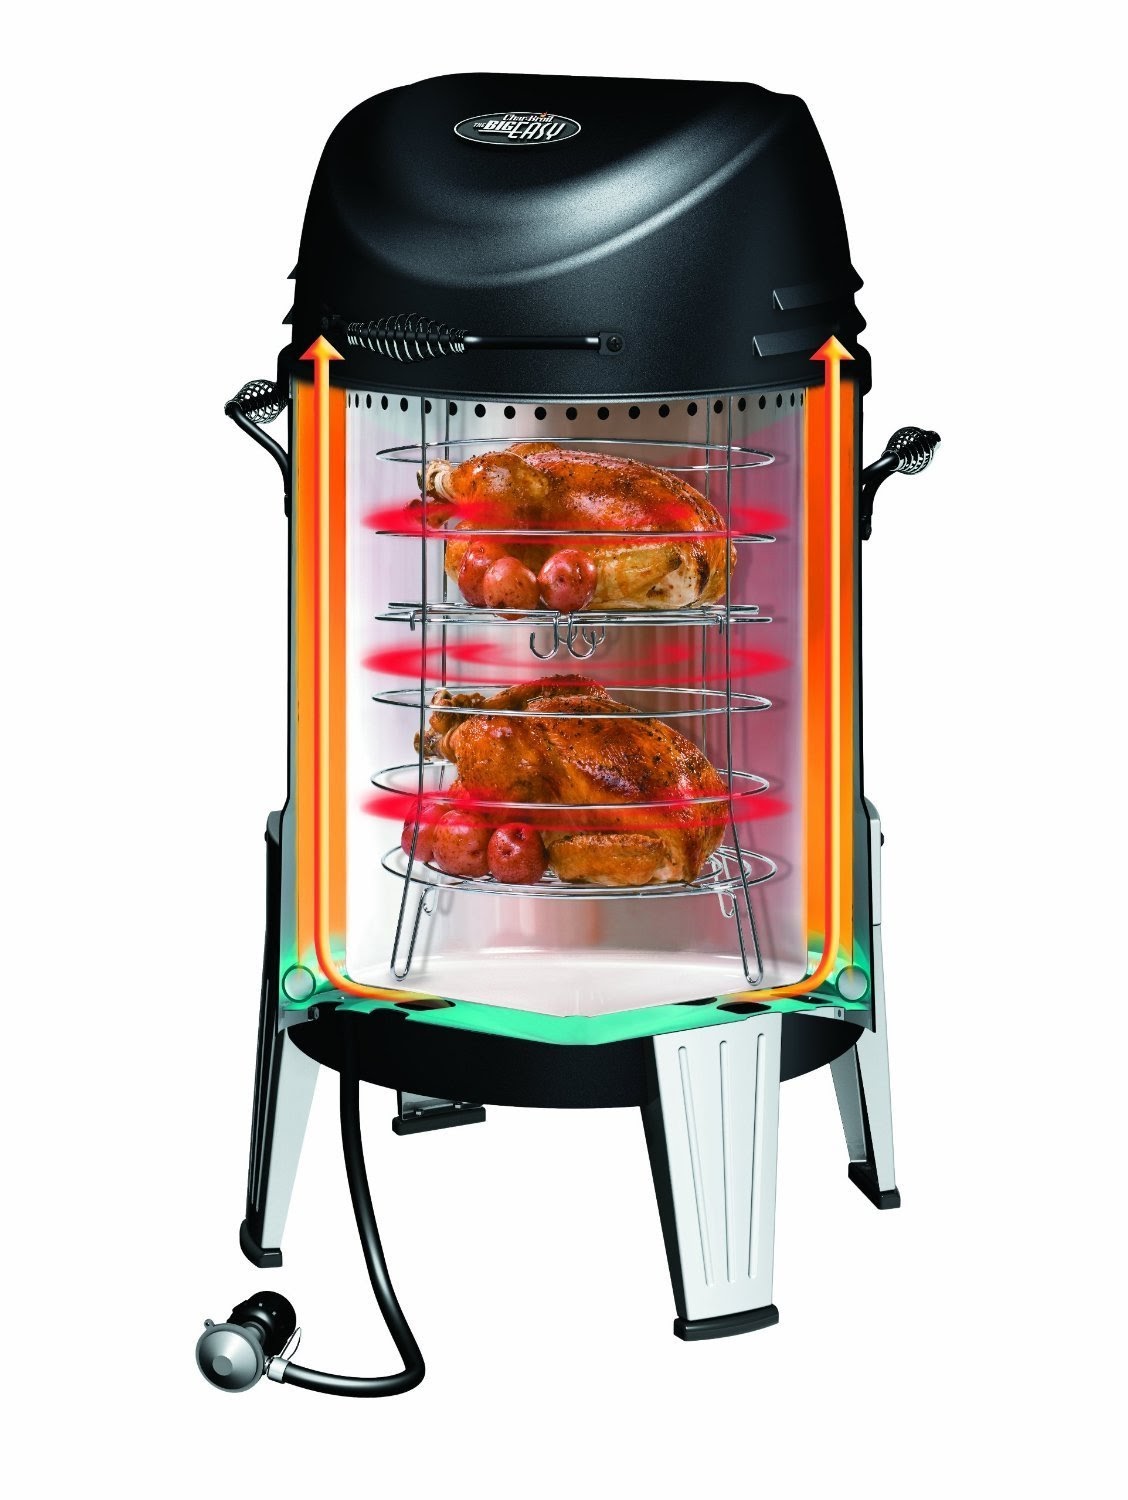 Home, Garden & More...: Char-Broil The Big Easy TRU-Infrared Smoker